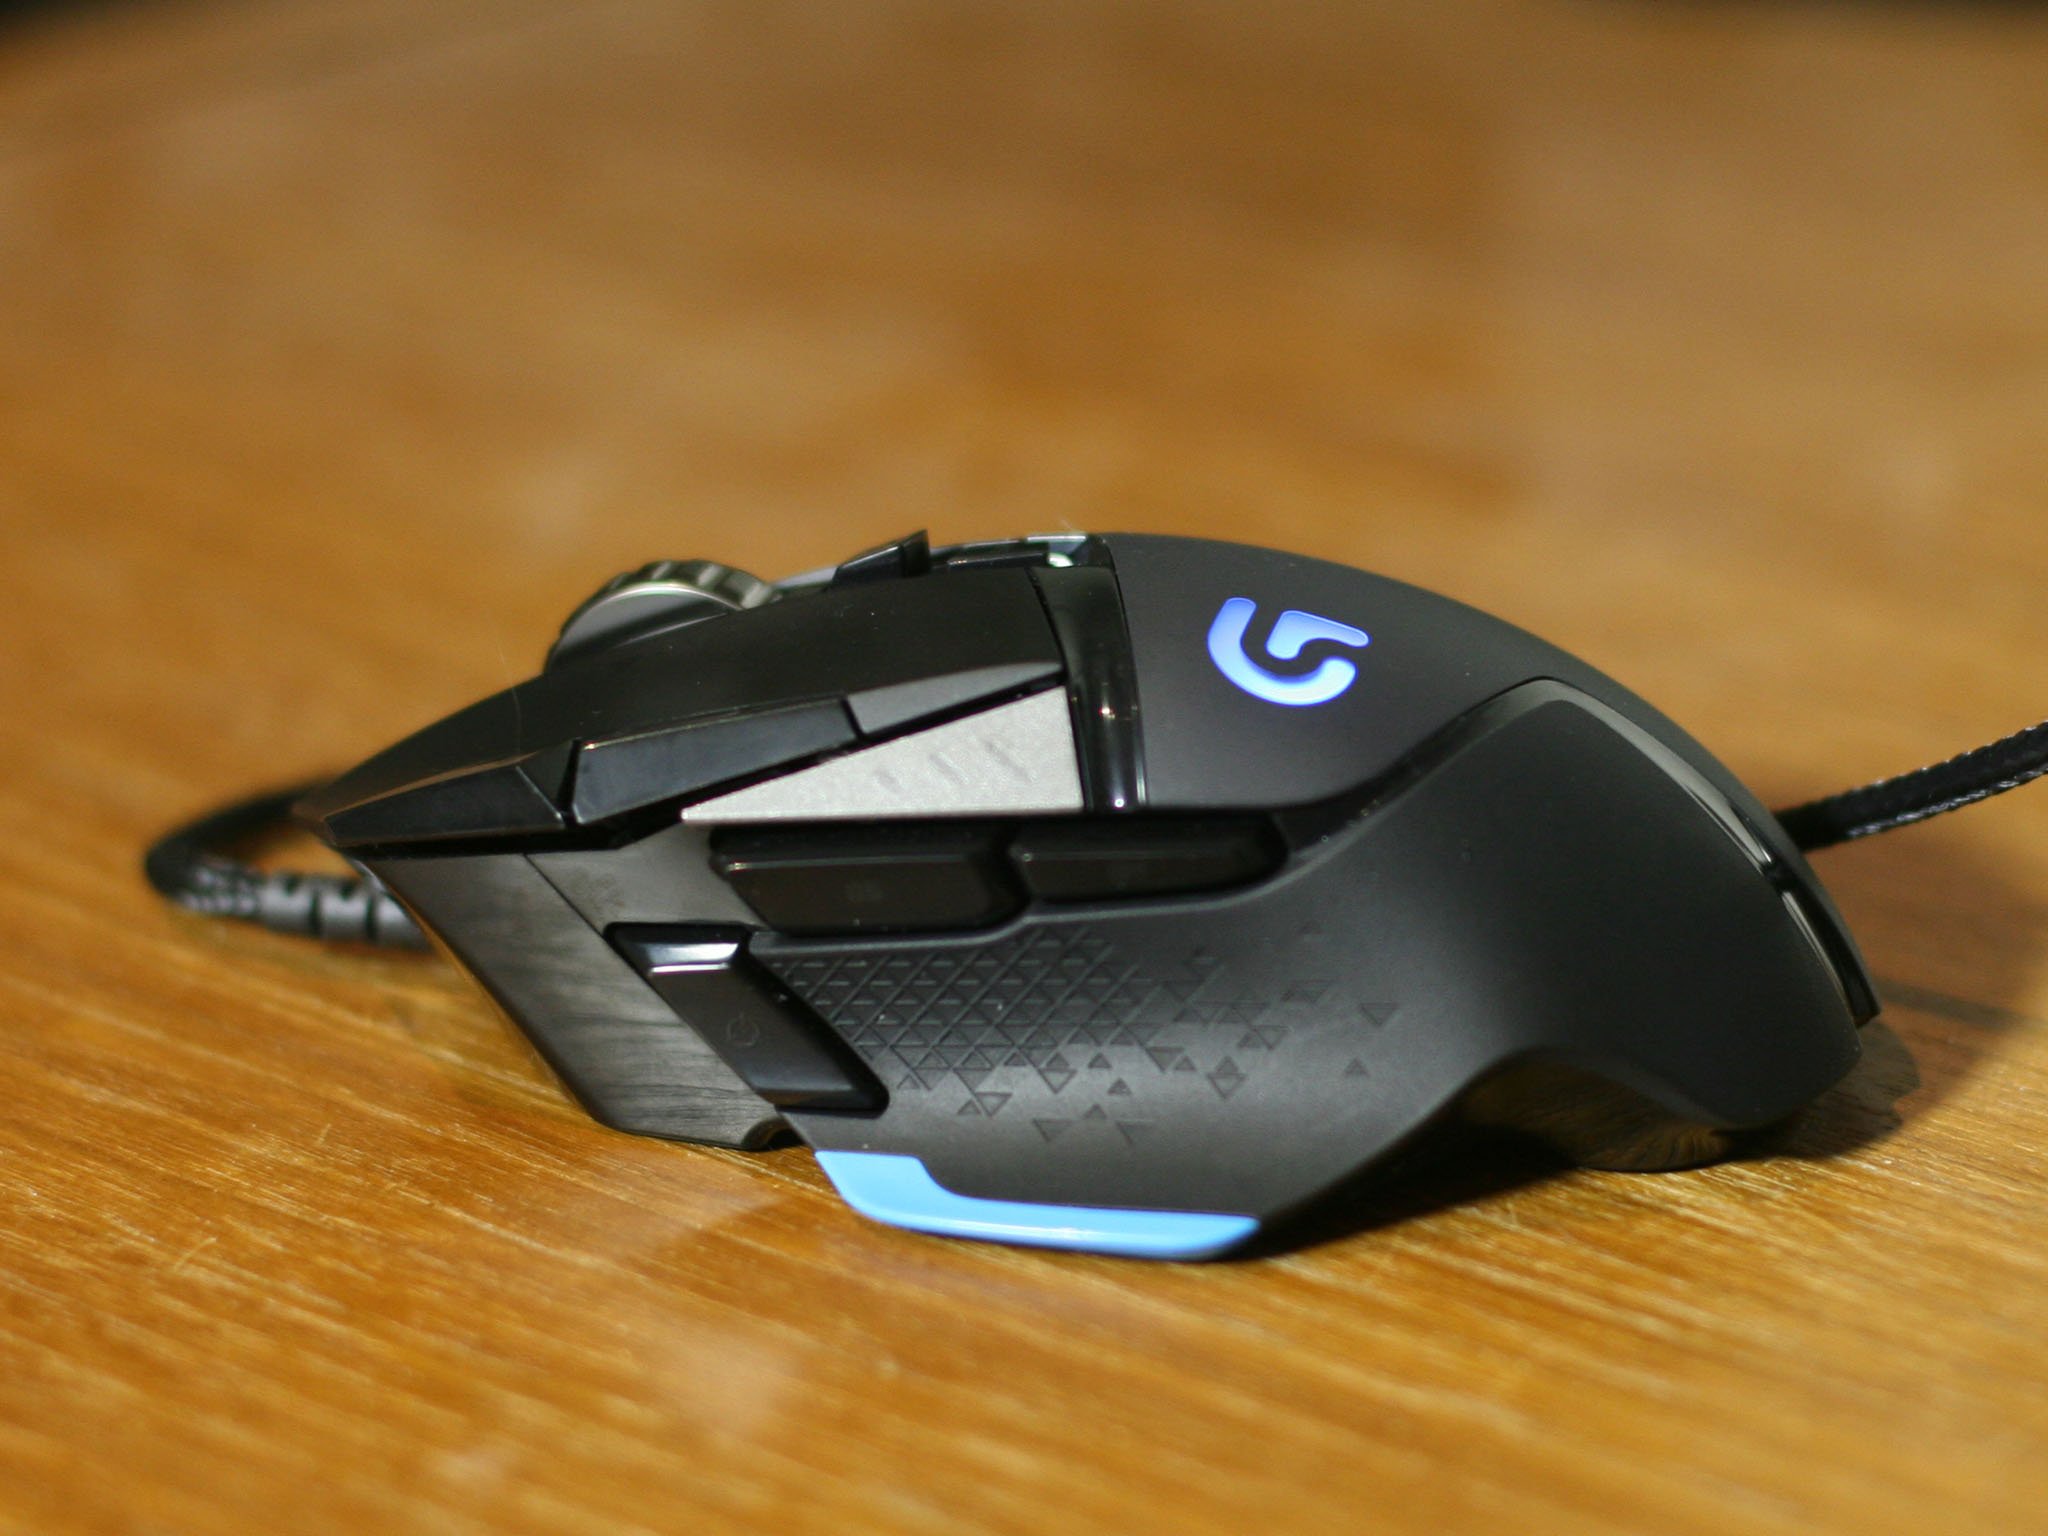 Is here really someone who is using weight for mouse? I think Logitech g502  is really heavy by itself 😀 : r/LogitechG